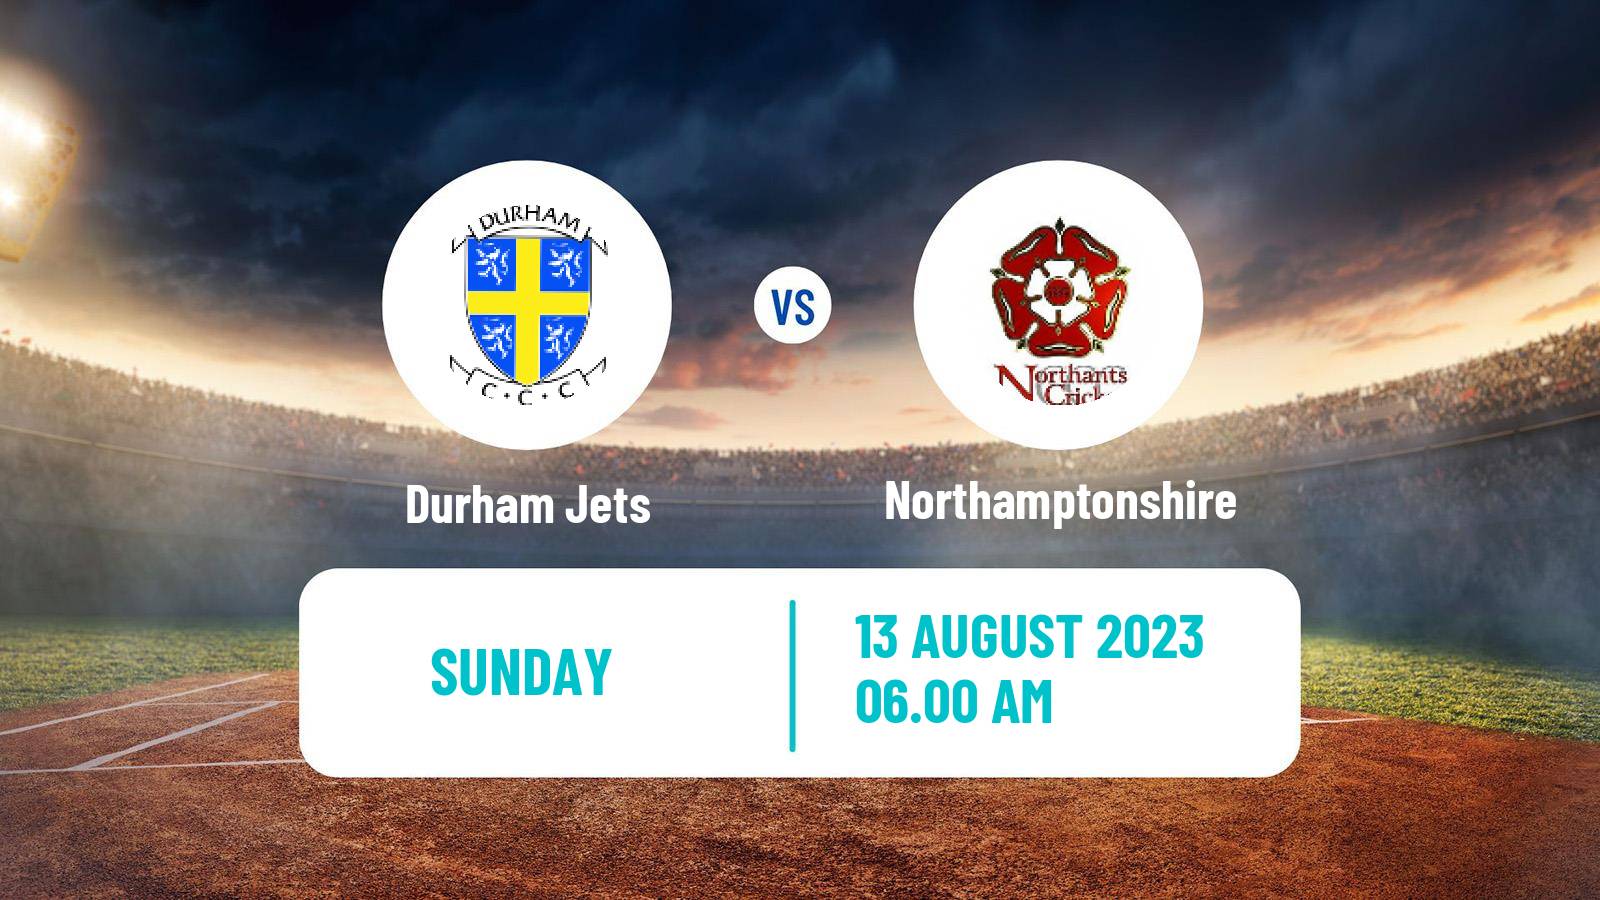 Cricket Royal London One-Day Cup Durham - Northamptonshire